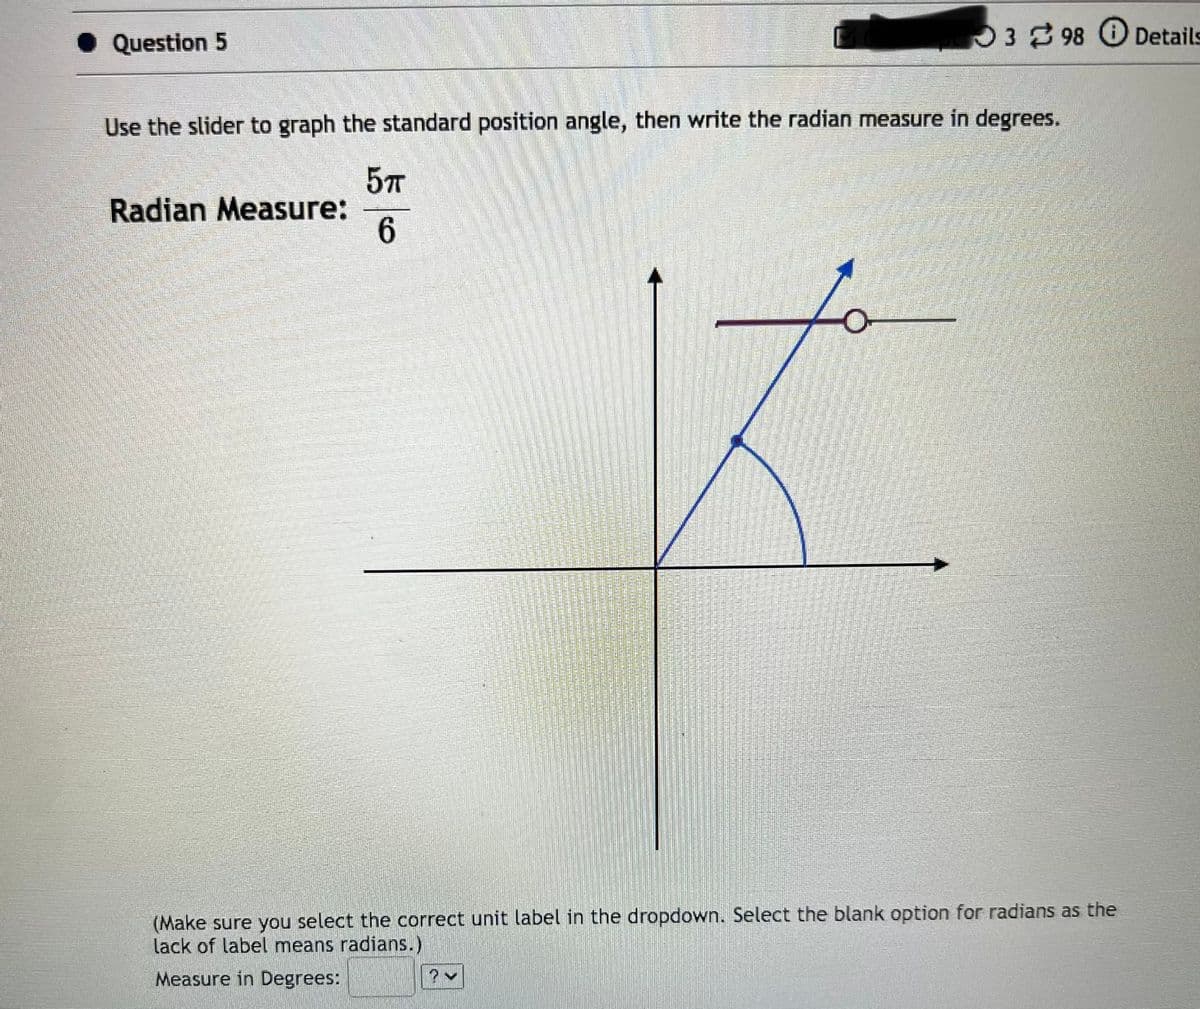 Question 5
398 Details
Use the slider to graph the standard position angle, then write the radian measure in degrees.
5п
6
Radian Measure:
(Make sure you select the correct unit label in the dropdown. Select the blank option for radians as the
lack of label means radians.)
Measure in Degrees: